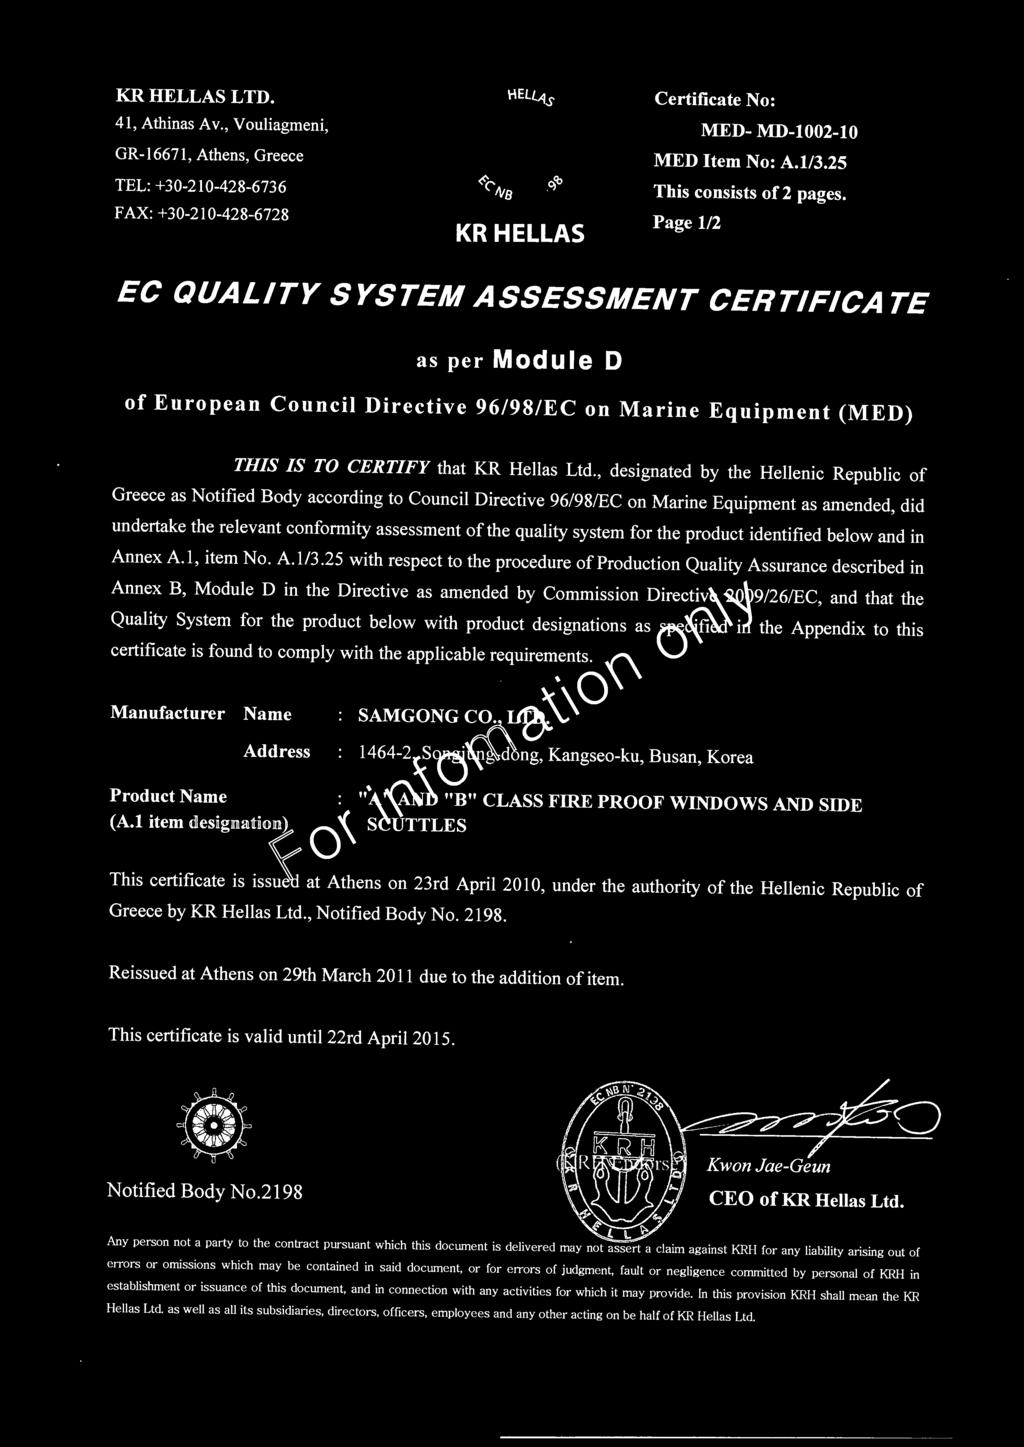 25 with respect to the procedure of Production Quality Assurance described in Annex B, Module D in the Directive as amended by Commission Direc~\ ~~ 9/26/EC, and that the Quality System for the